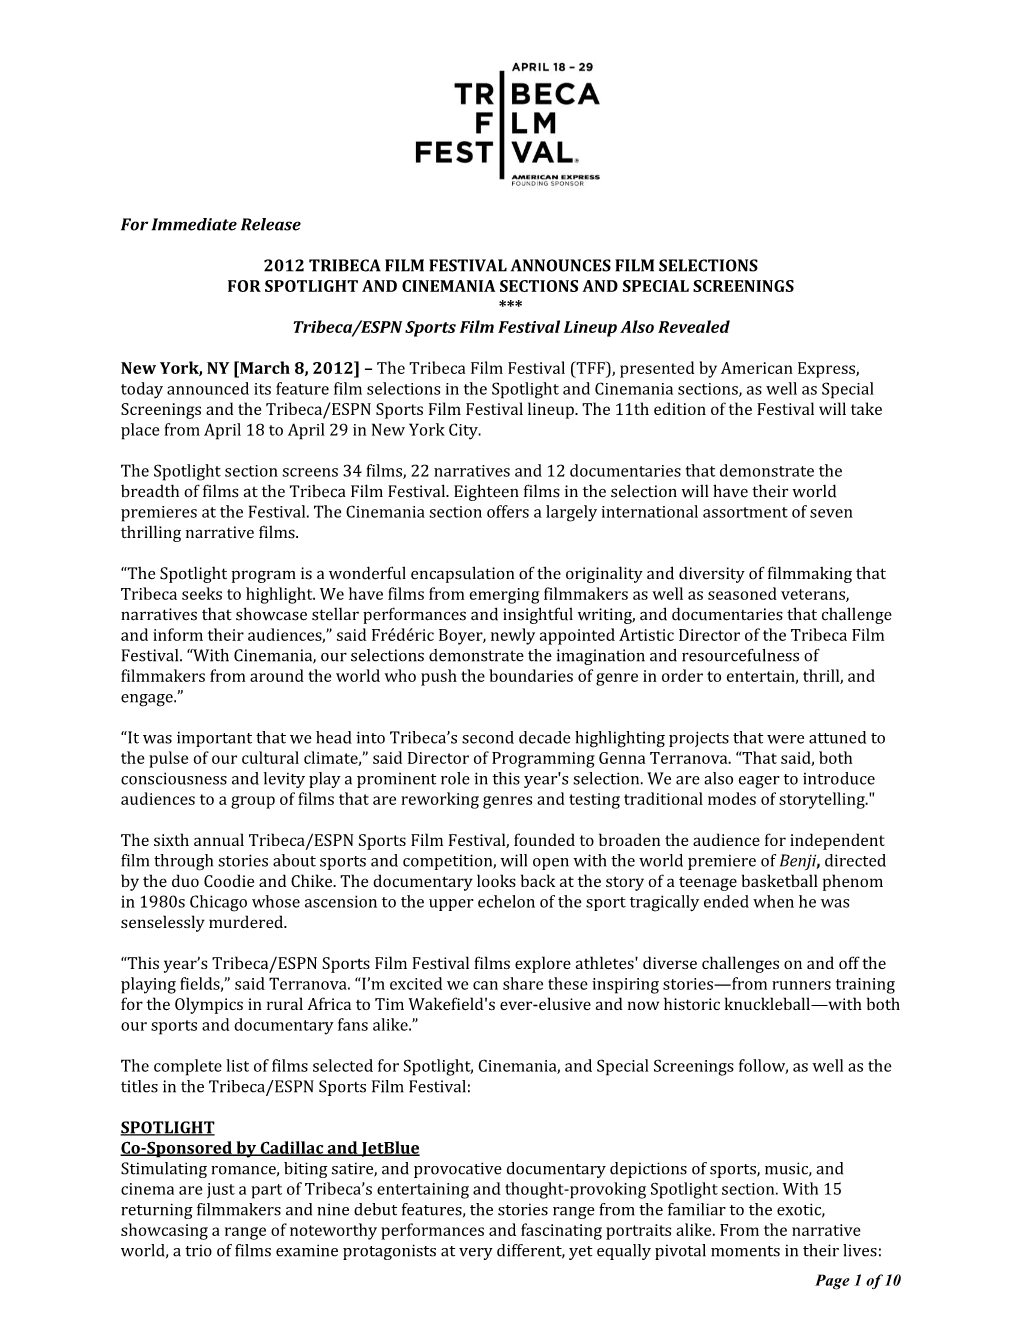 For Immediate Release 2012 TRIBECA FILM FESTIVAL ANNOUNCES FILM SELECTIONS for SPOTLIGHT and CINEMANIA SECTIONS and SPECIAL SCRE